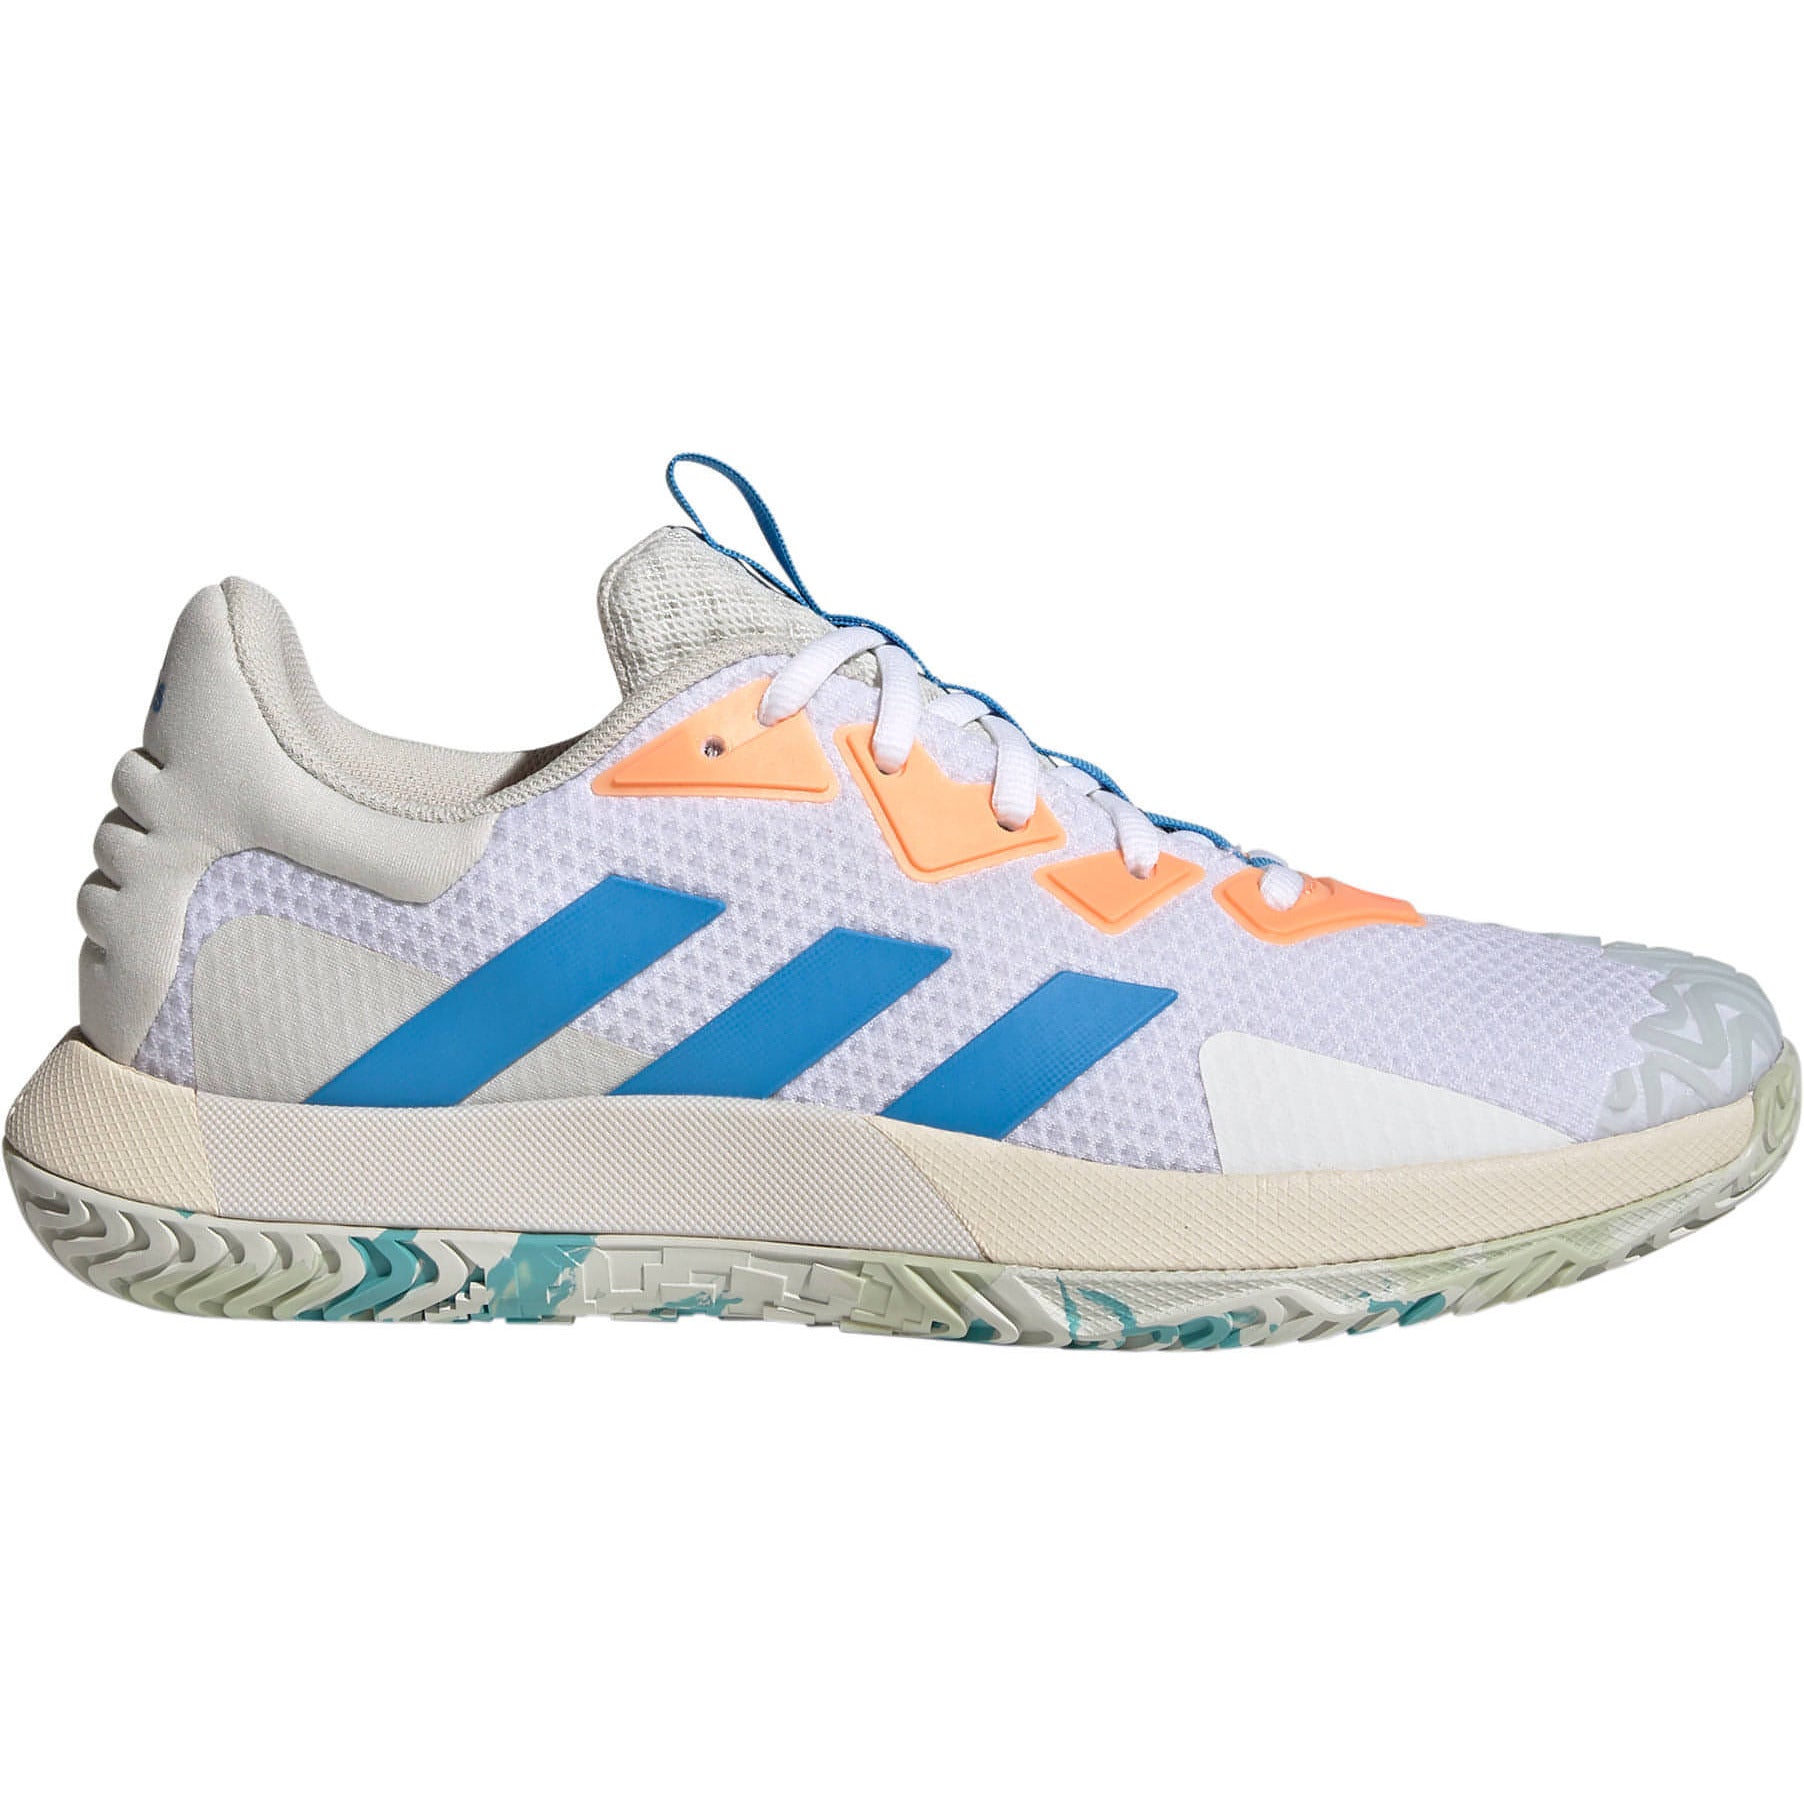 adidas SoleMatch Control Mens Tennis Shoes - White